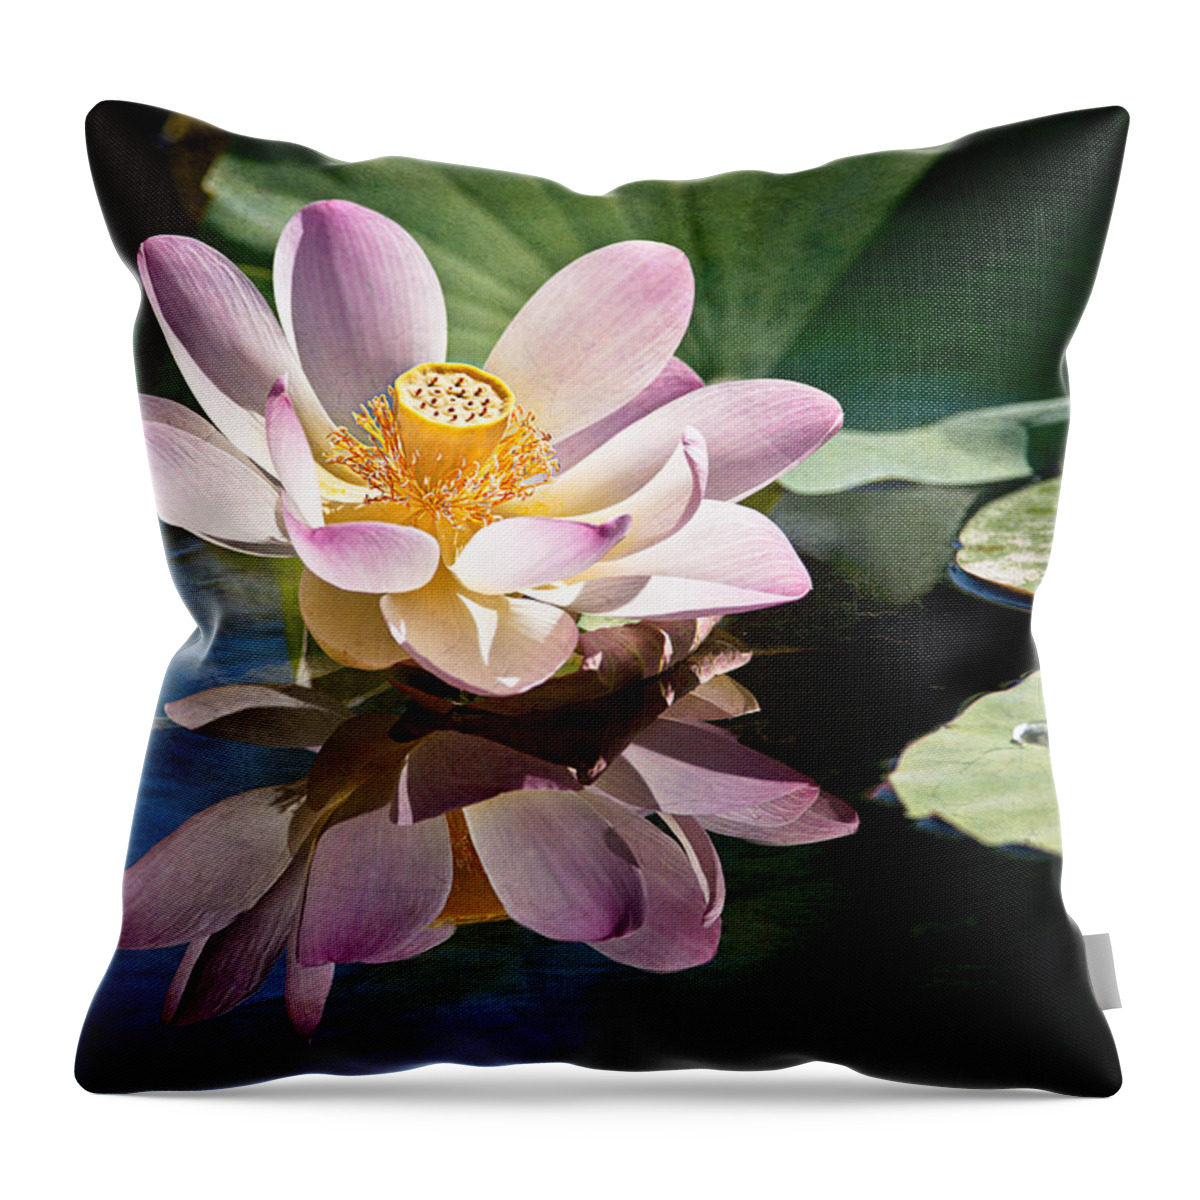 Lotus Throw Pillow featuring the photograph Casting A Beautiful Reflection by Jeff Abrahamson